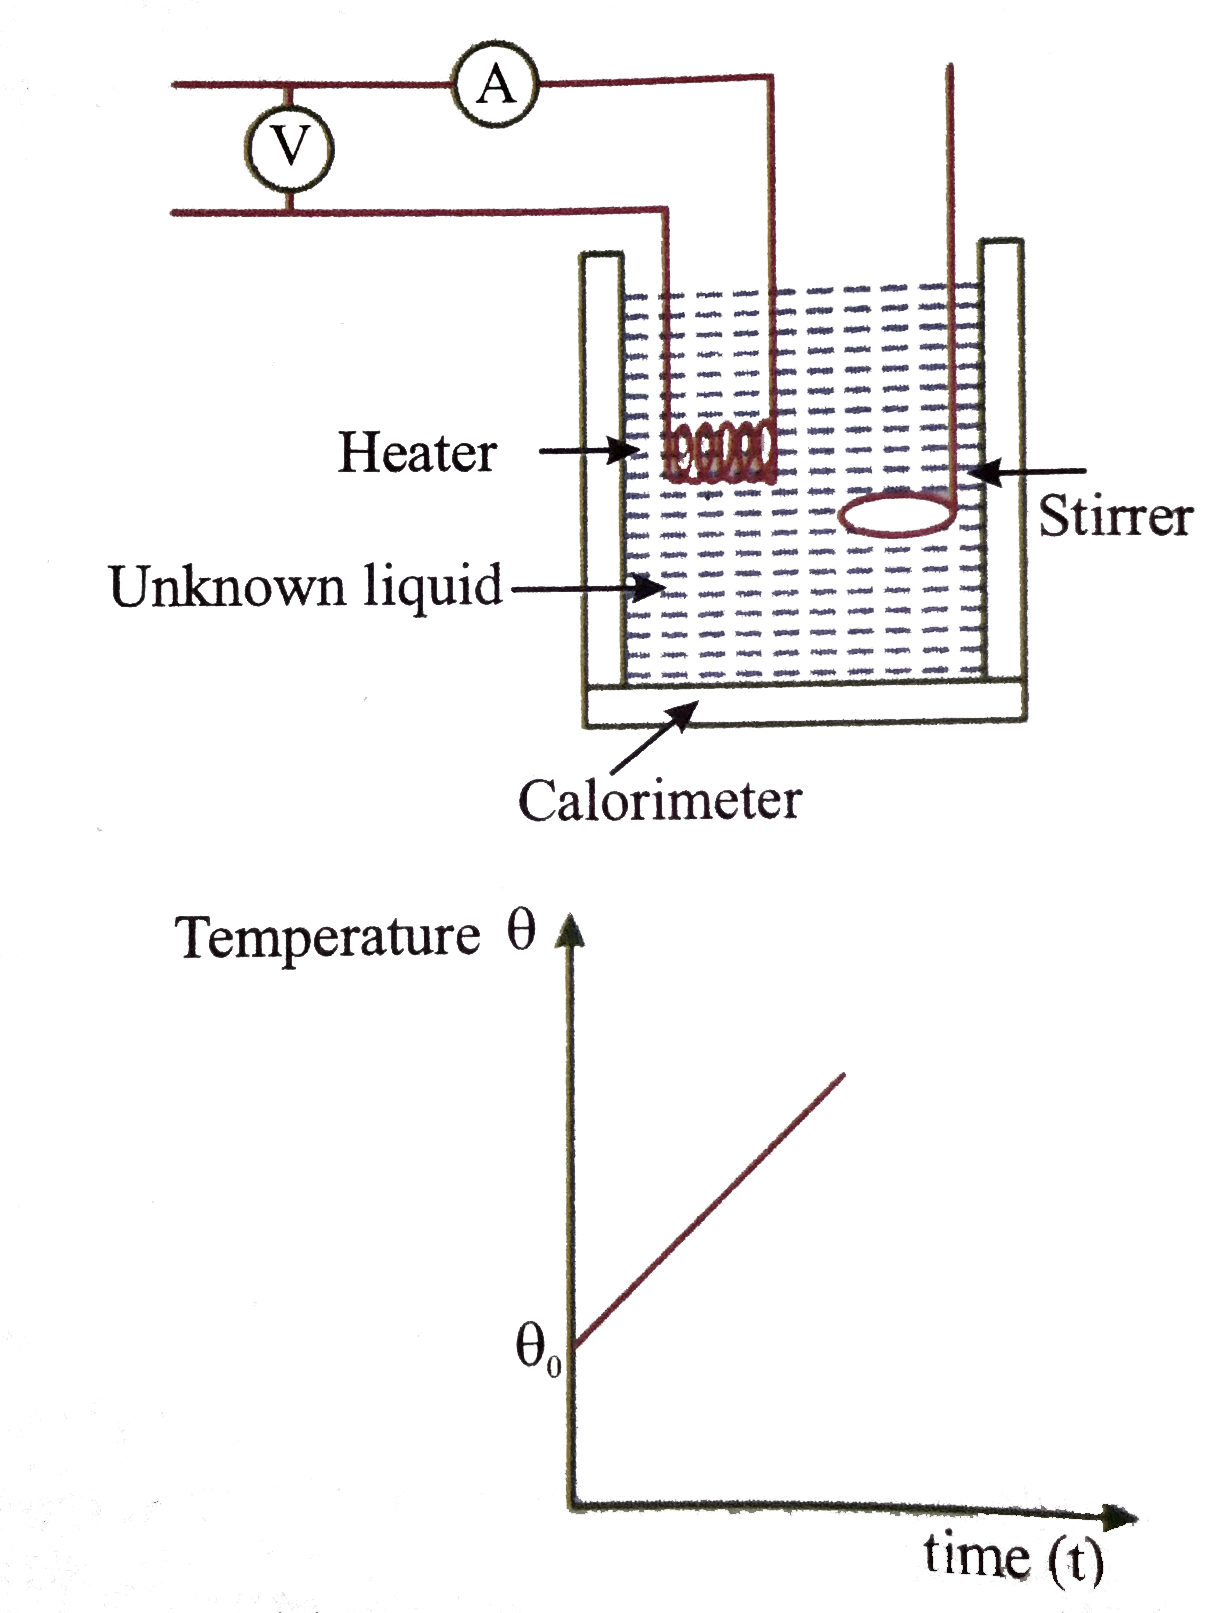 Figure shows an electrical calorimeter to determine specific heat capacity of an unknown liquid, First of all, the mass of empty calorimeter (a copper container) is measured and suppose it is m(1). Then the unknown liquid is poured in it. Now the combined mass of calorimeter+liquid system is measured and let it be m(2). So the mass of liquid is (m(2)-m(1)). Initially both were at room temperature (theta(0)).   Now a heater is immeresed in if for time interval t. The voltage drop across the heater is V and current passing through it is I. Due to heat supplied, the temperature of both the liquid and calorimeter will rise simultaneously. After t sec, heater was switched off, and final temperature is theta(r). If there is no heat loss to surroundings. Heat supplied by the heater=Heat absorbed by the liquid+heat absorbed by the calorimeter (VI)t=(m(2)-m(1))S(1)(theta(f)-theta(0))+m(1)S(c)(theta(f)-theta(0))   The specific heat of the liquid S(1)=(((VI)t)/(theta(f)-theta(0))-m(1)S(c))/((m(2)-m(1)))      Radiation correction: There can be heat loss to environment. To compensate this loss, a correction is introduced.   Let the heater was on for t sec, and then it is switched off. Now the temperature of the mixture falls due to heat loss to environment. The temperature of the mixture is measured t//2 sec. after switching off. Let the fall in temperature during this time is varepsilon   Now the corrected final temperature is taken as theta(f)=theta(f)+varepsilon   In this experiment voltage across the heater is 100.0V and current is 10.0A, and heater was switched on for t=700.0 sec. Initially all elements were at room temperature theta(@)=10.0^(@)C and final temperature was measured as theta(f)=73.0^(@)C.   Mass of empty calorimeter ws 1.0 kg and the combined mass of calorimeter + liquid is 3.0 kg. The specific heat capacity of the calorimeter =3.0xx10^(3)J//kg^(@)C. The falls in temperature 350 second after switching off the heater was 7.0^(@)C. Find the specific heat capacity of the unknown liquid in proper significant figures.